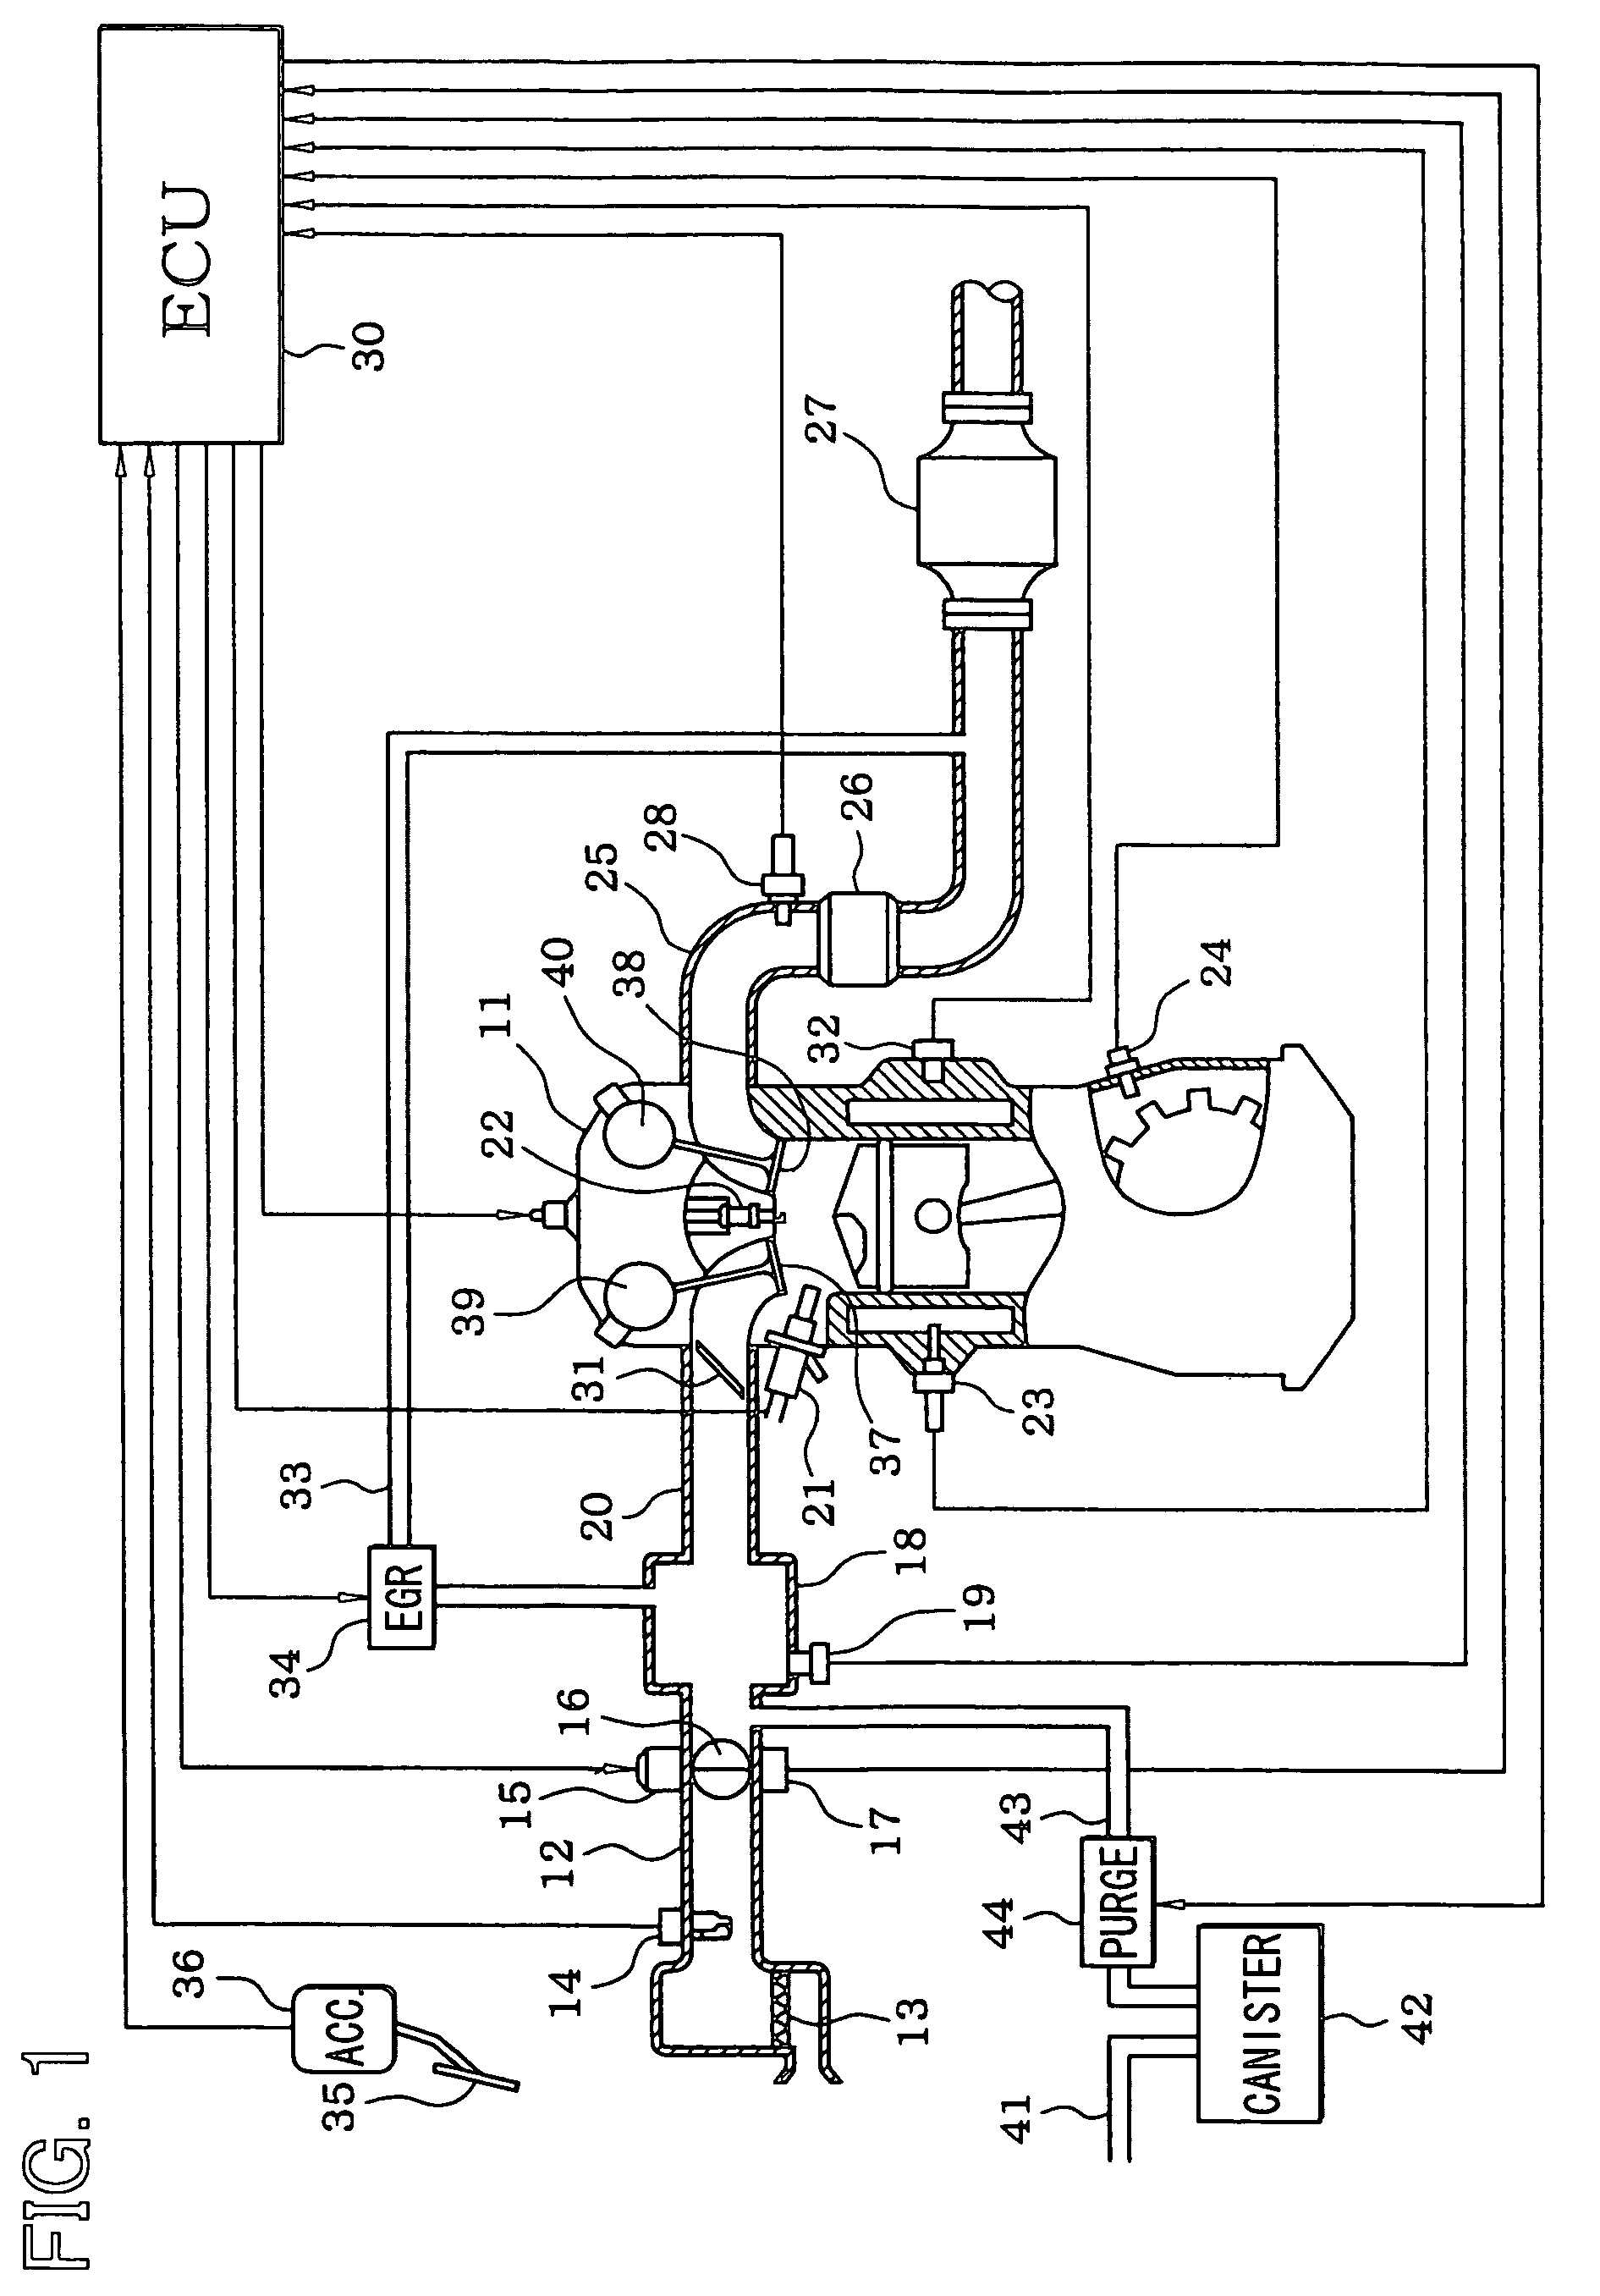 Fuel injection controller for in-cylinder injection engine